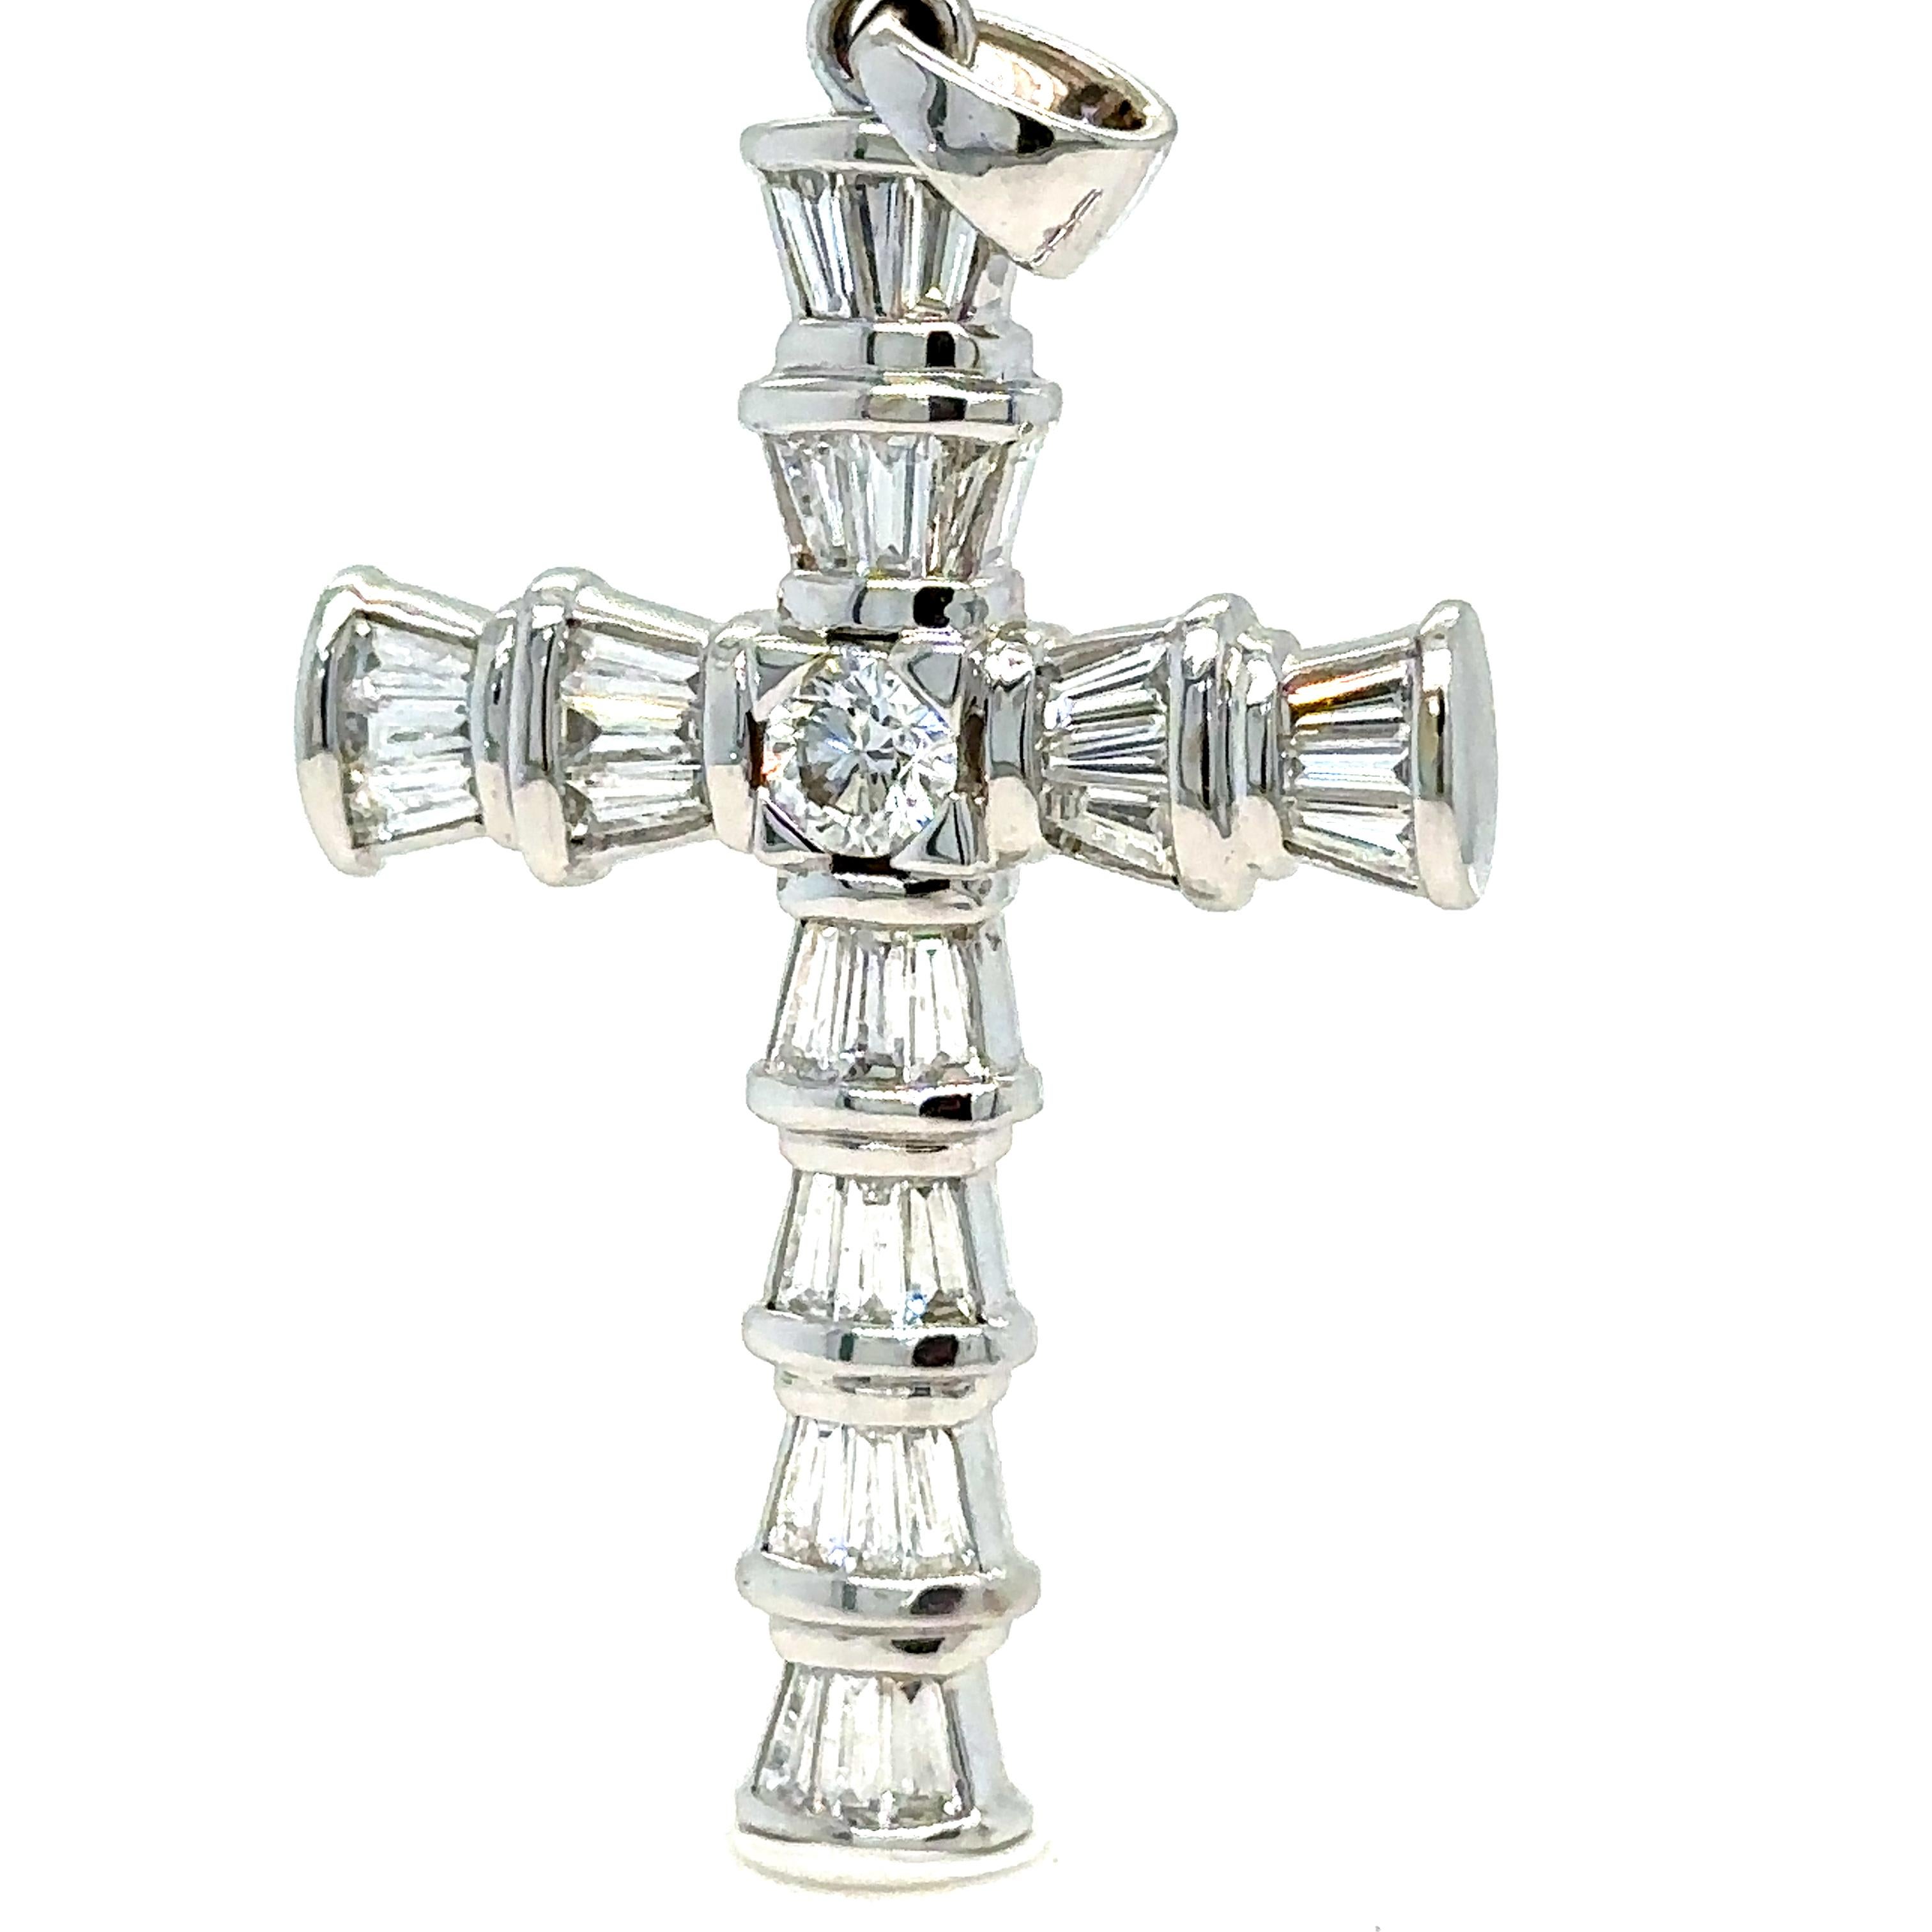 Unique features: 

One hallmarked 18ct White Gold Diamond set cross pendant containing 30 x channel set tapered baguette Diamonds & 1 x claw set Diamond.

Cross measures 4.00cm in length, with articulated tapered pendant bale attached.

Method of